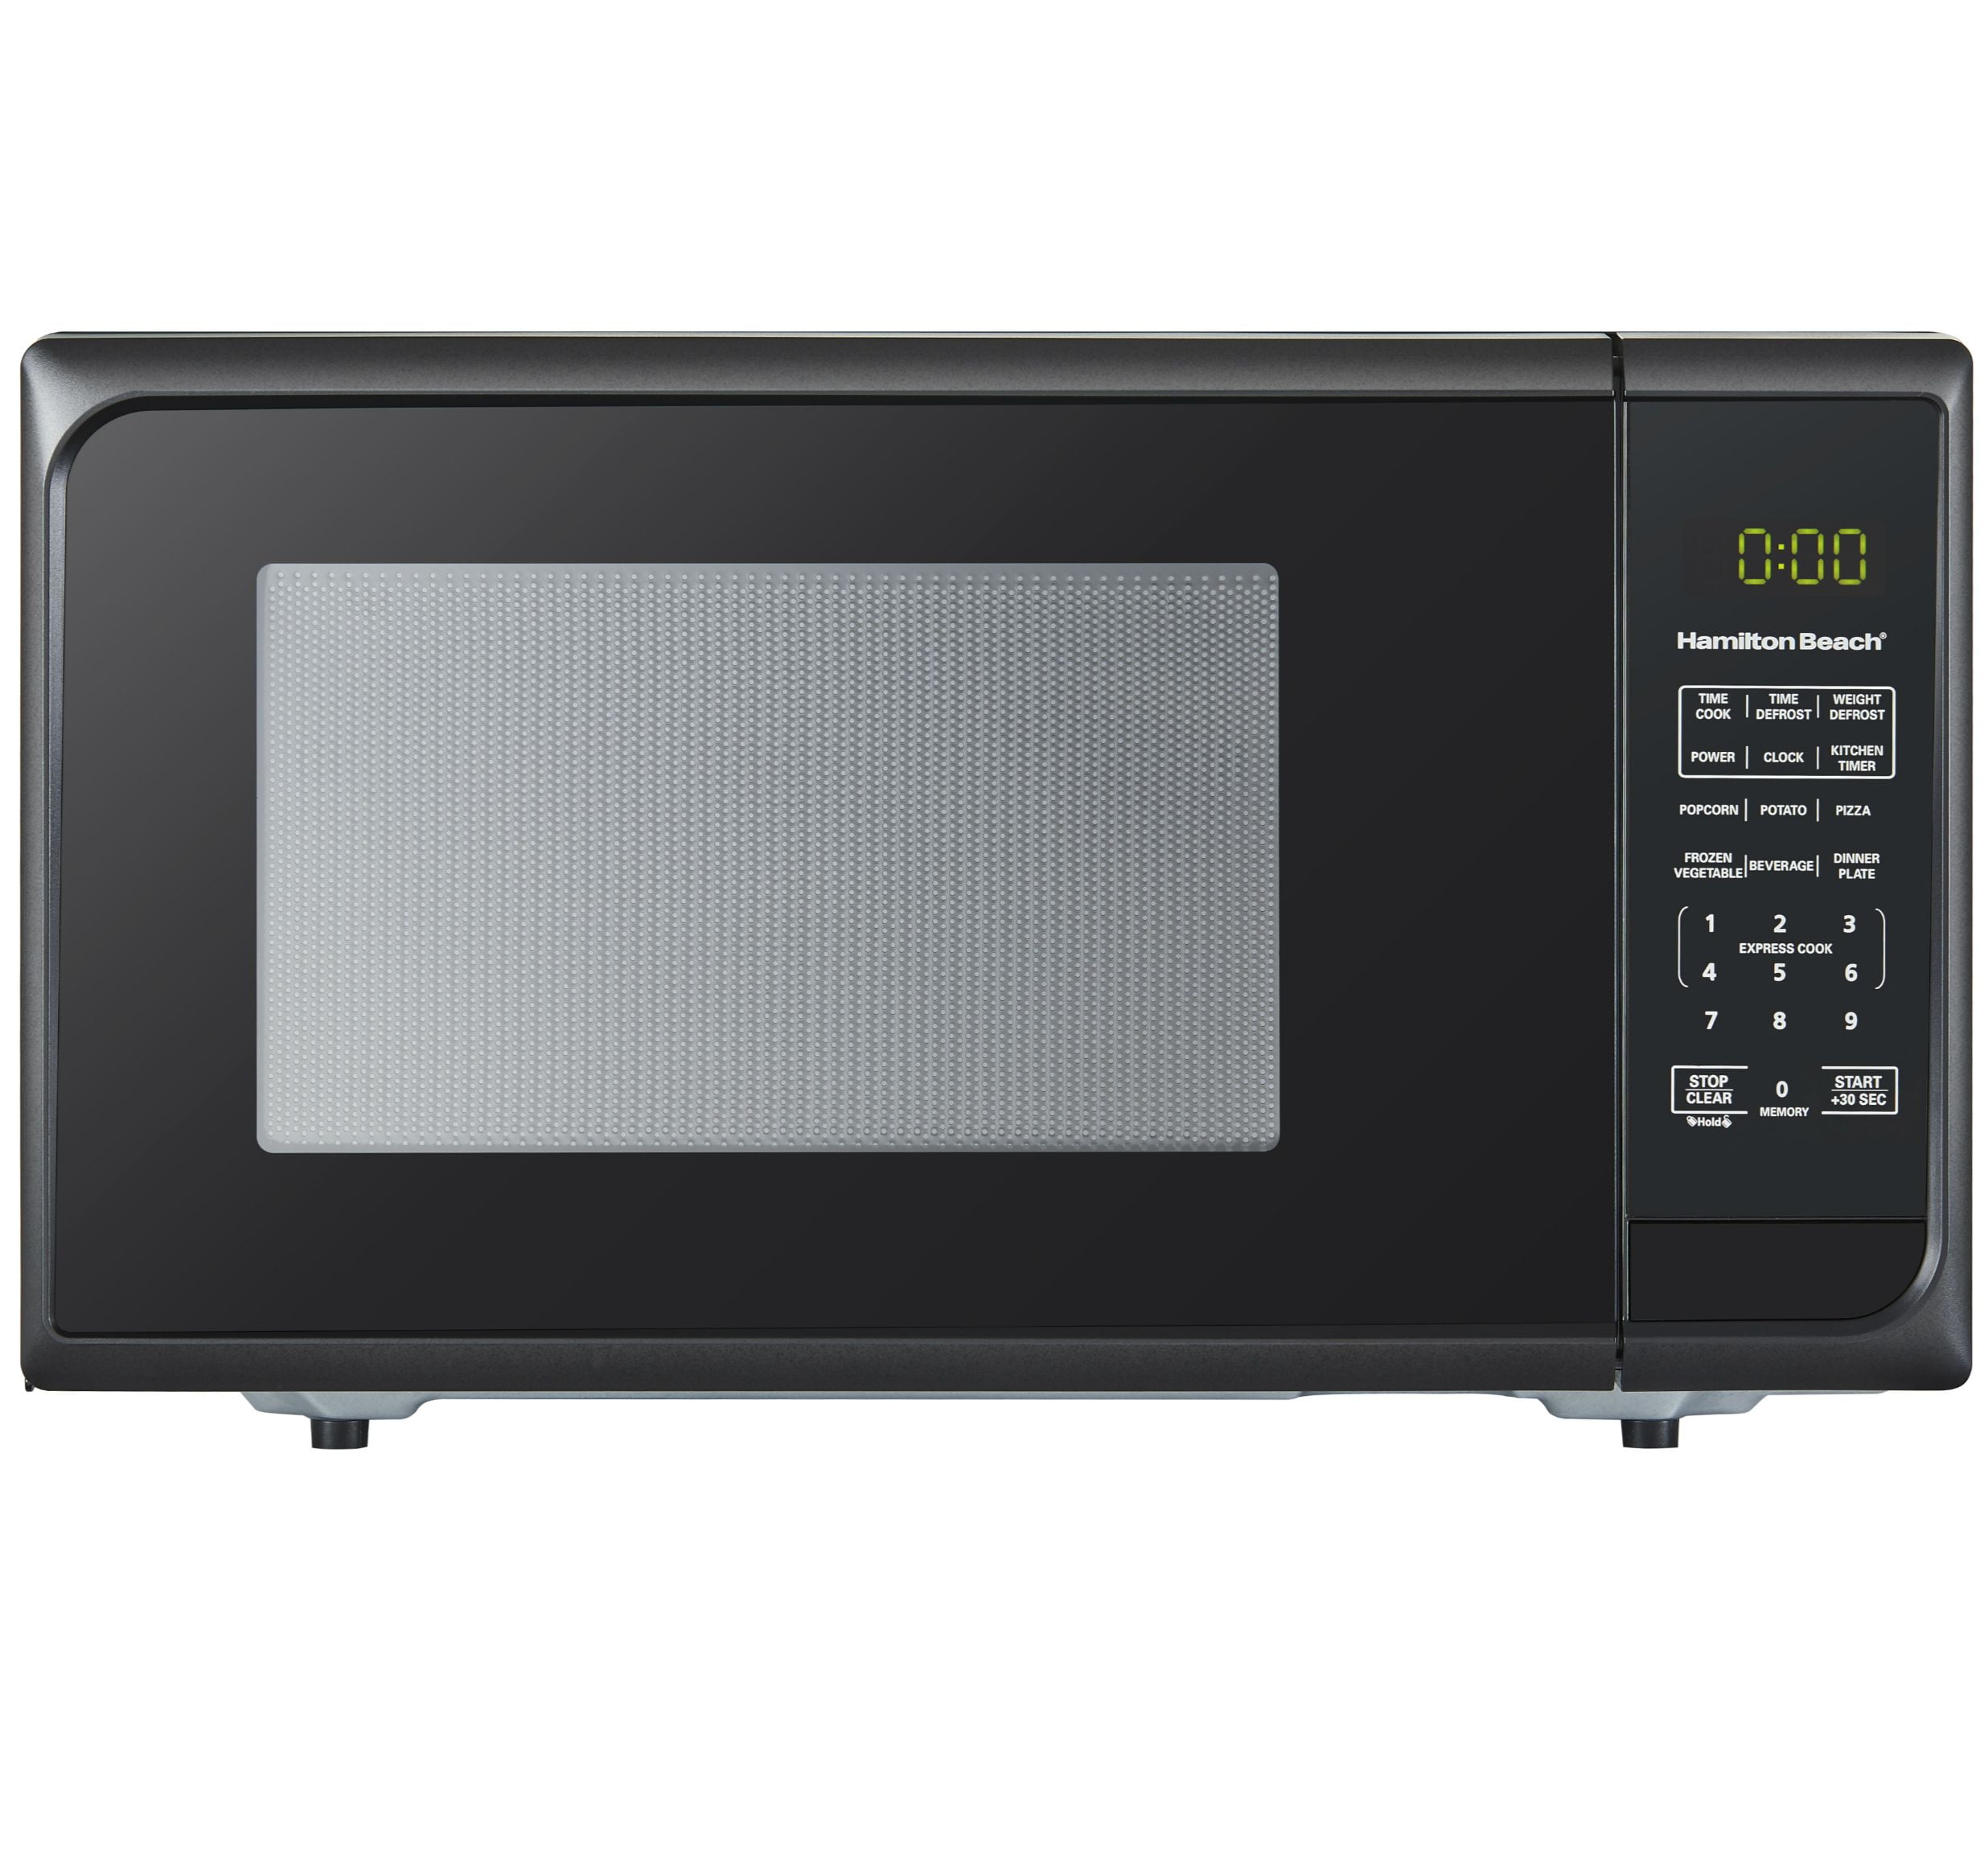 Oster Countertop Microwave Oven Stainless Steel Trim 1.3-cu.ft 1000w LED Display for sale online